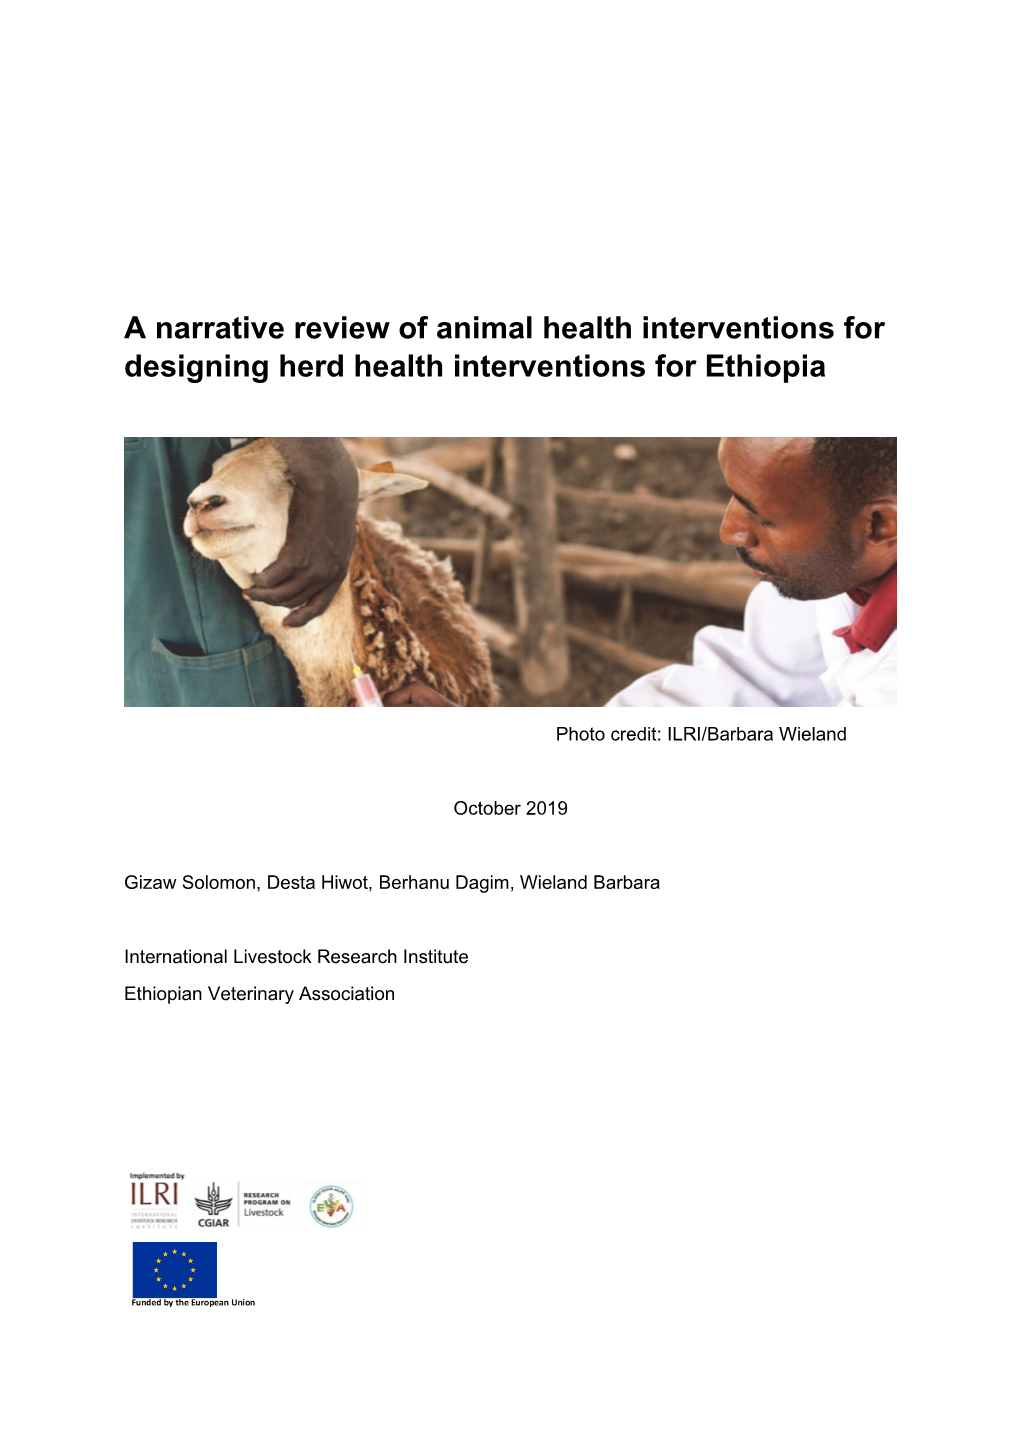 A Narrative Review of Animal Health Interventions for Designing Herd Health Interventions for Ethiopia